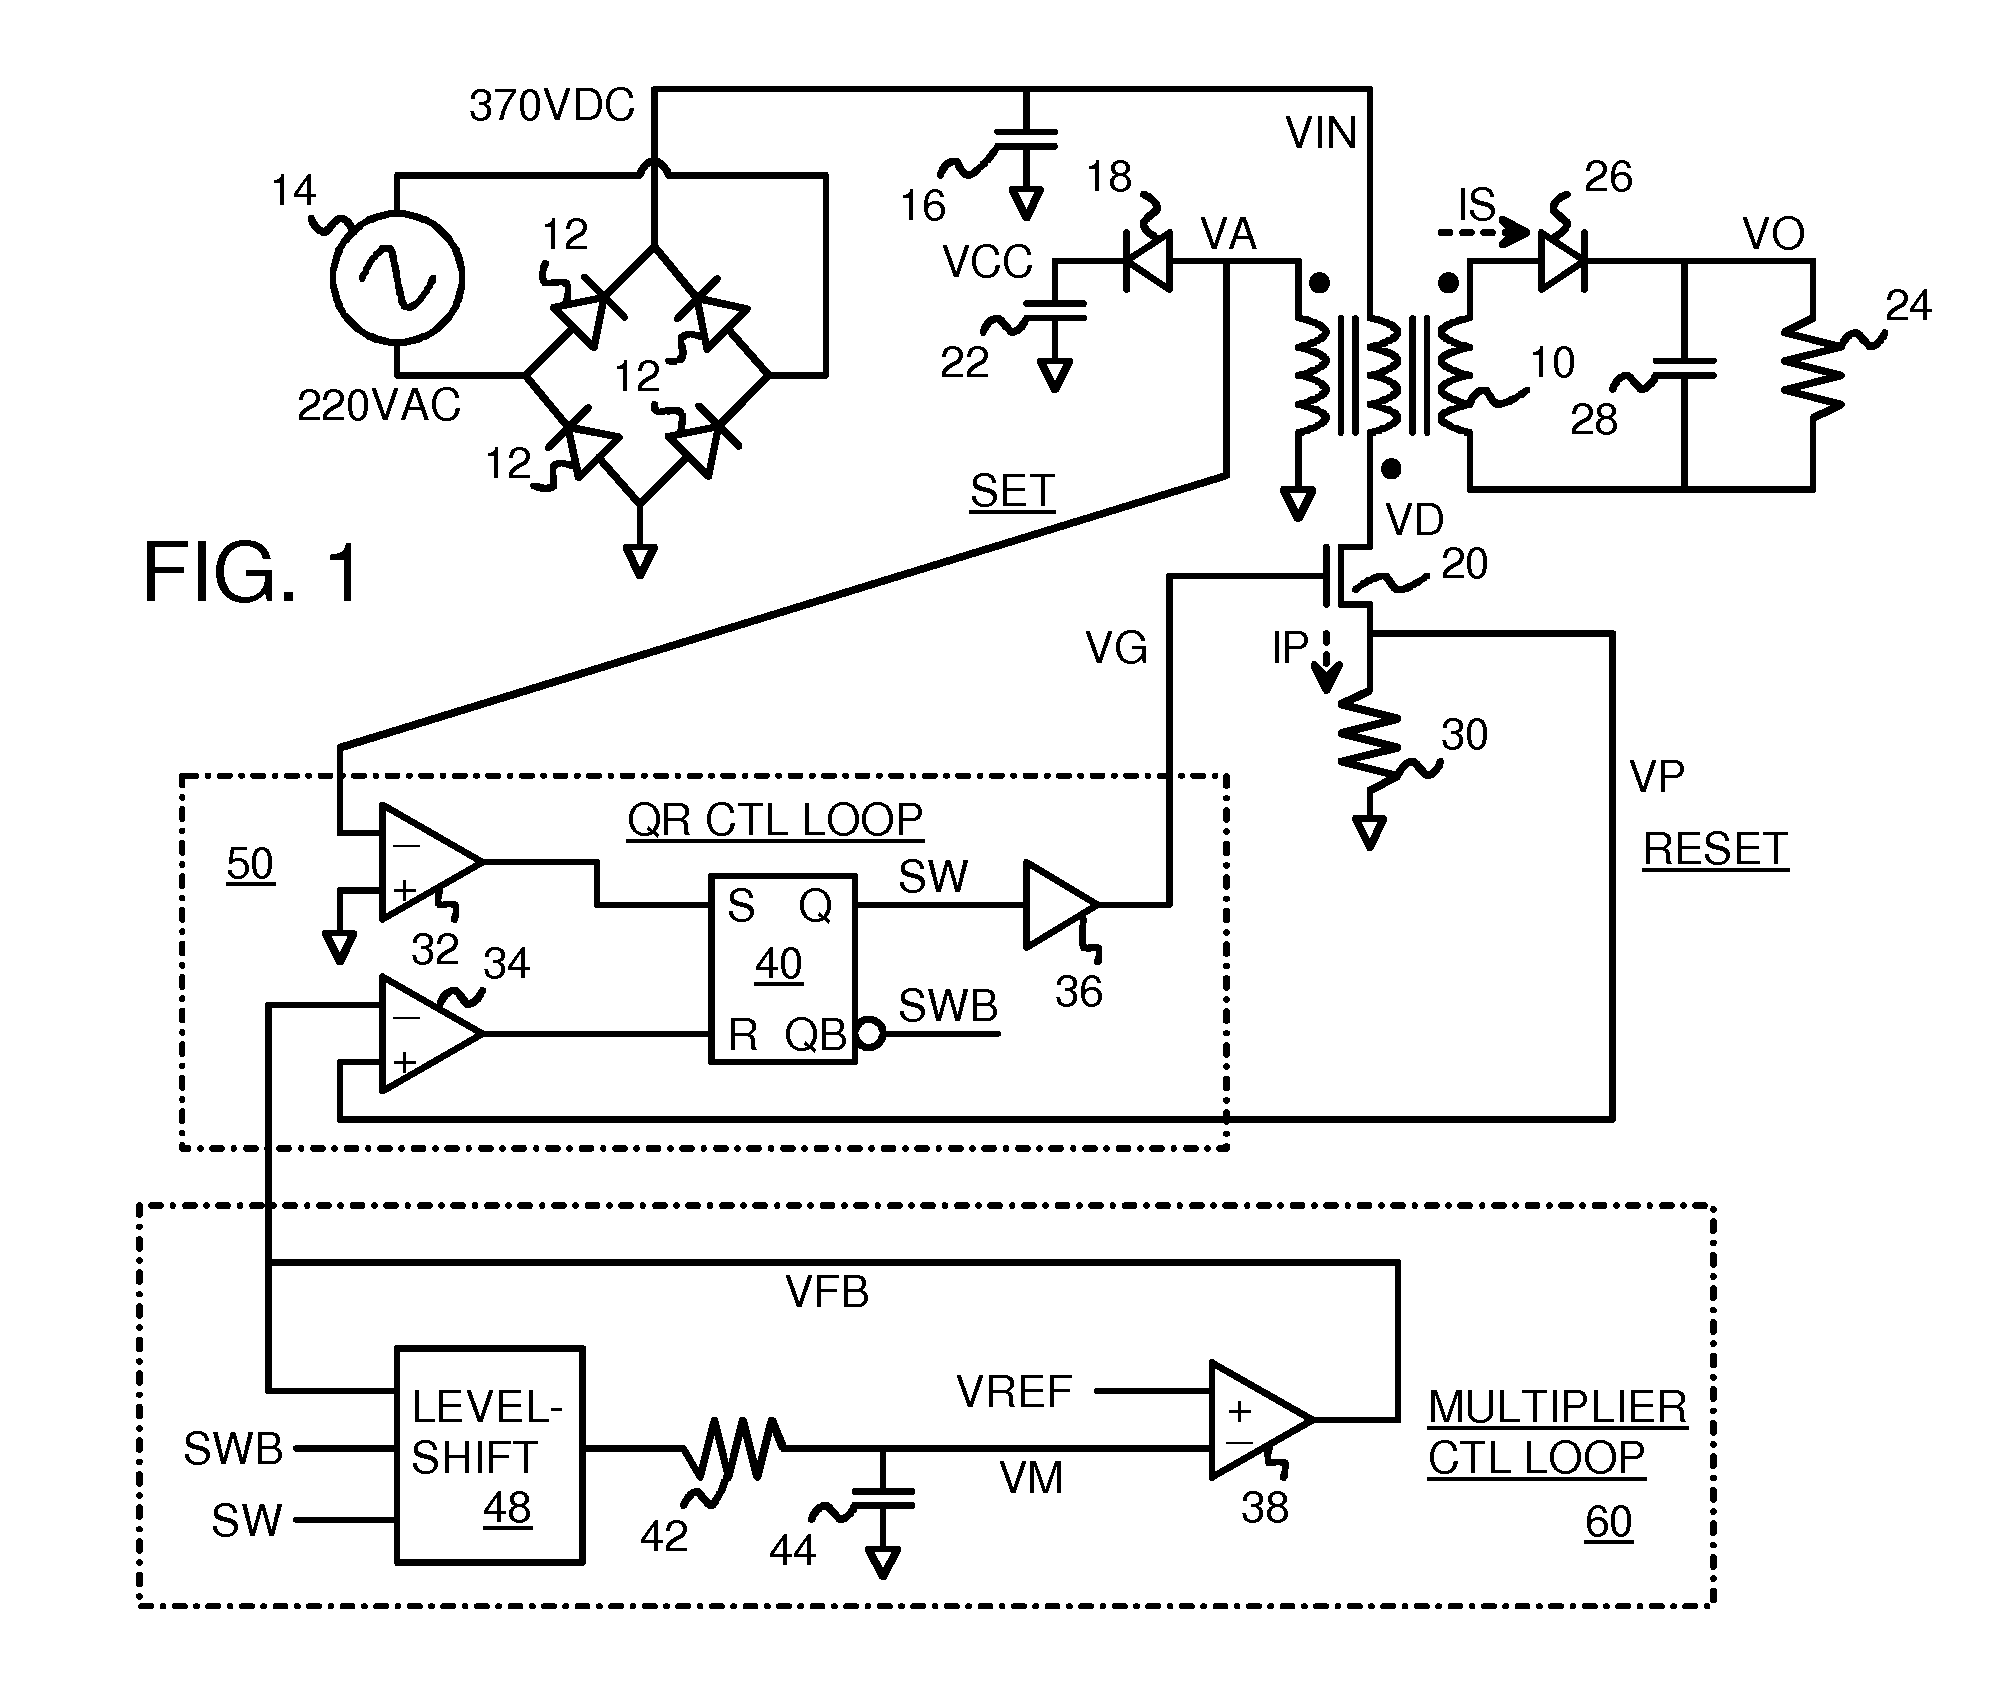 Constant-Current Control Module using Inverter Filter Multiplier for Off-line Current-Mode Primary-Side Sense Isolated Flyback Converter